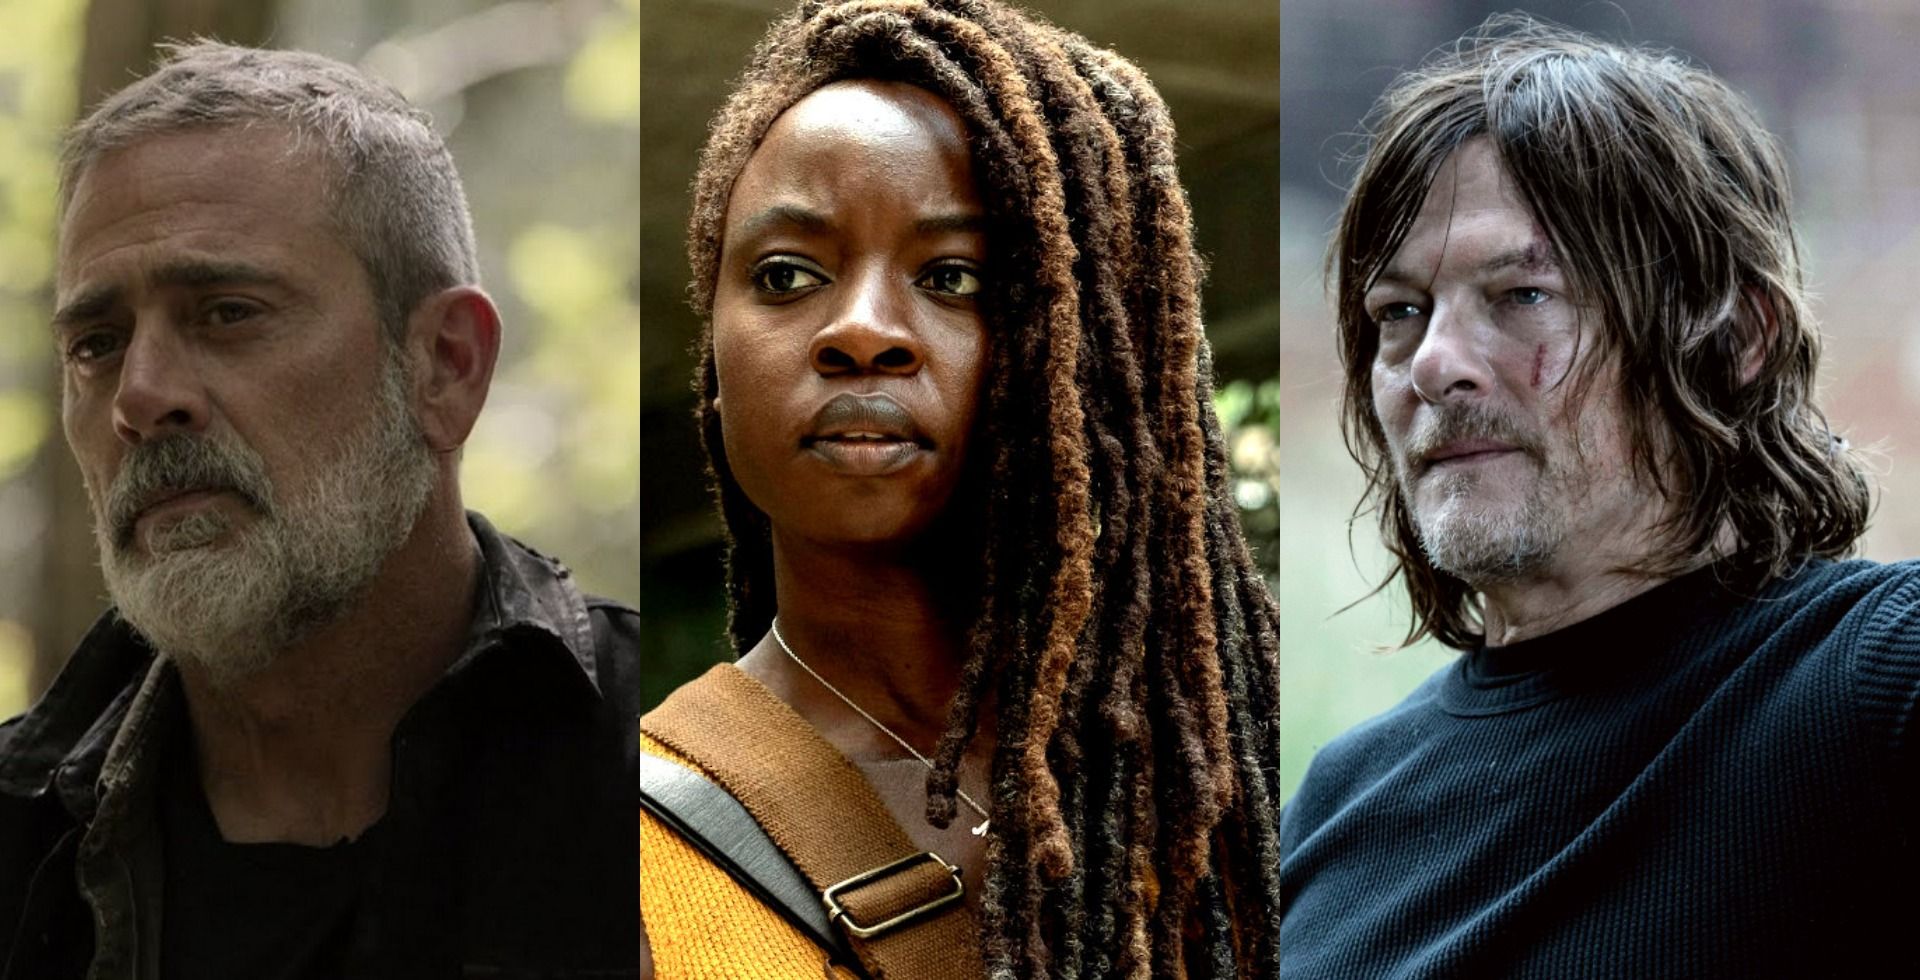 Negan, Michonne, and Daryl in The Walking Dead.